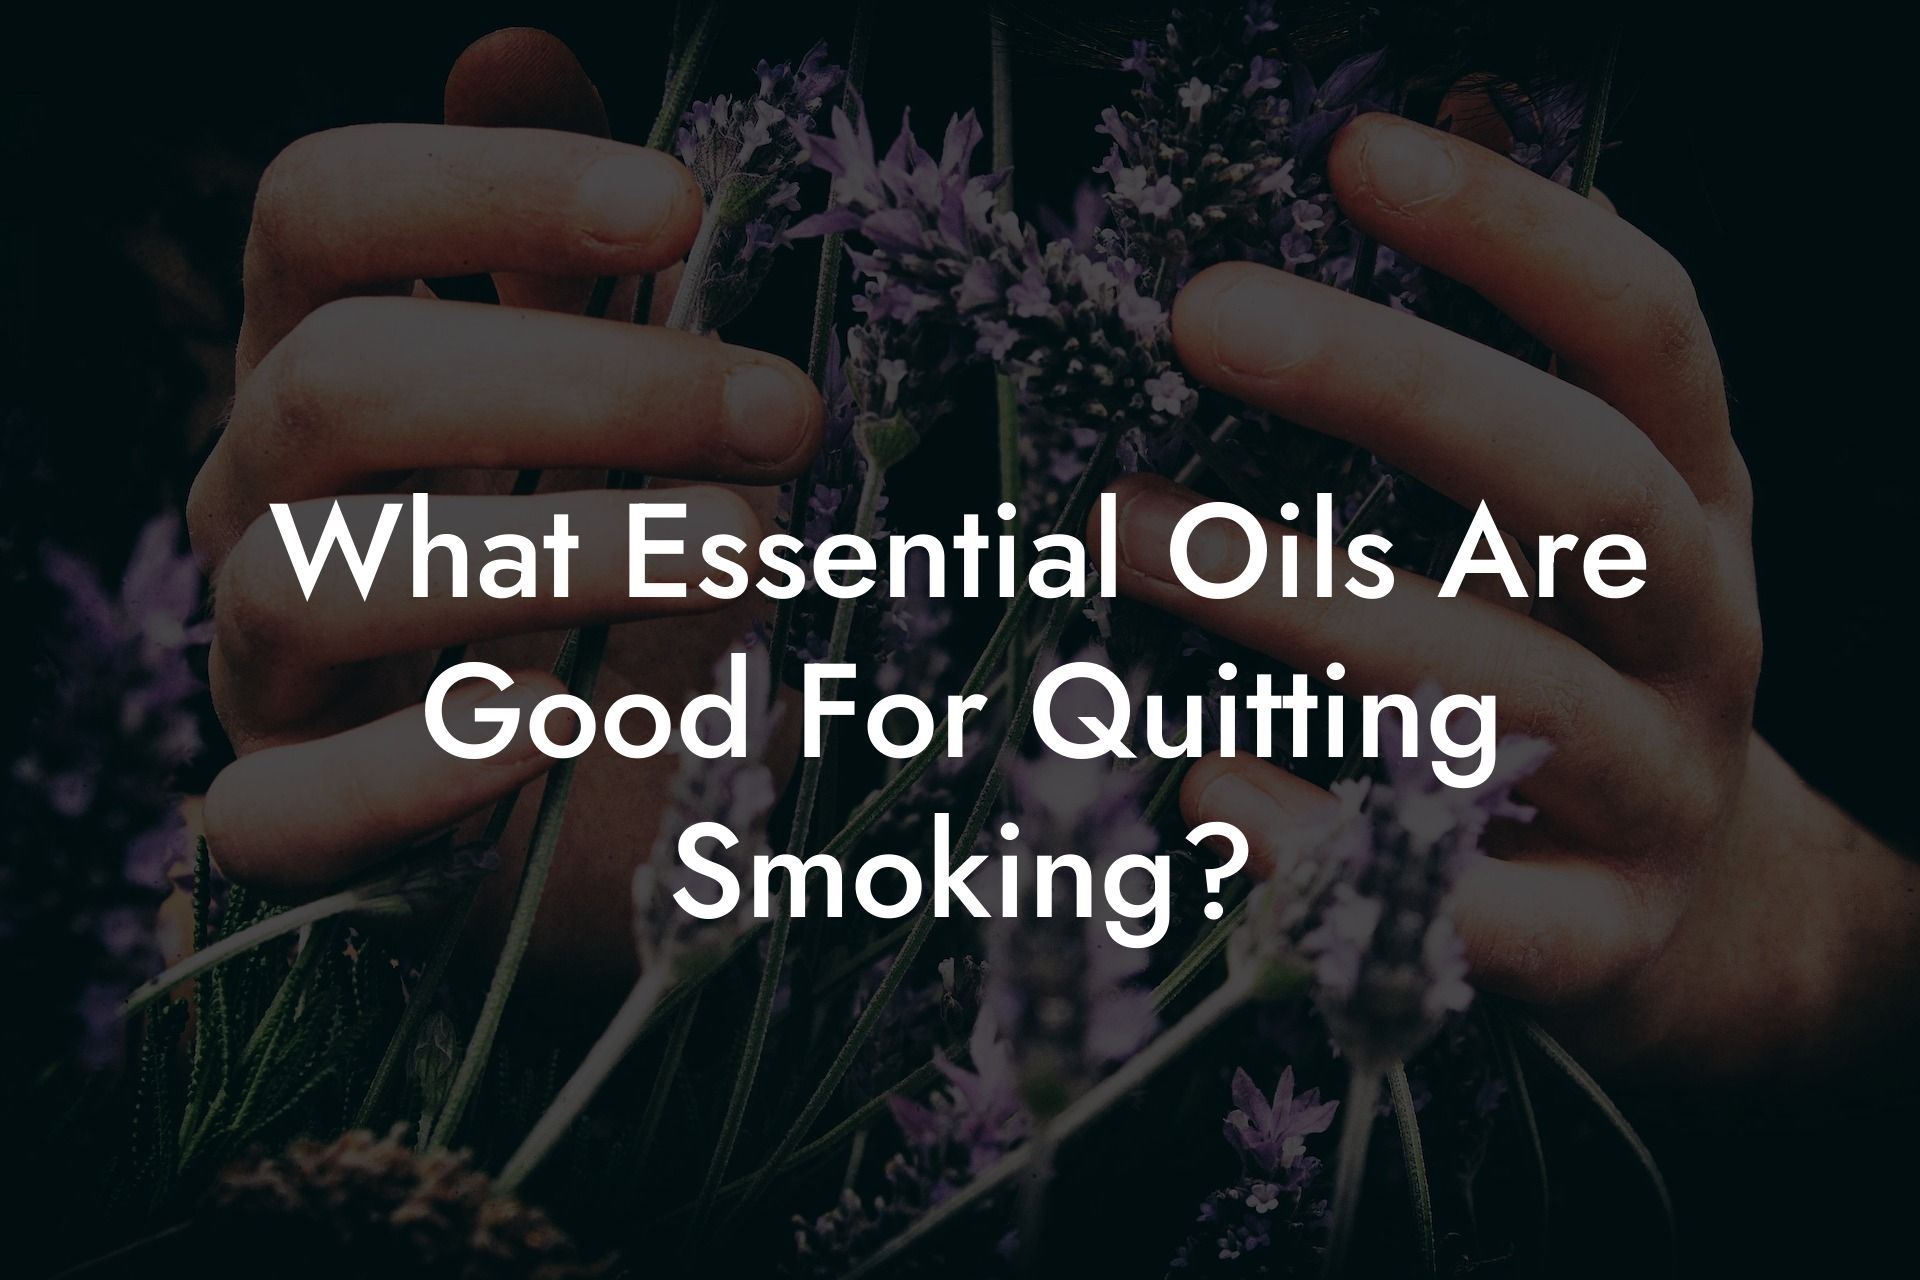 What Essential Oils Are Good For Quitting Smoking?